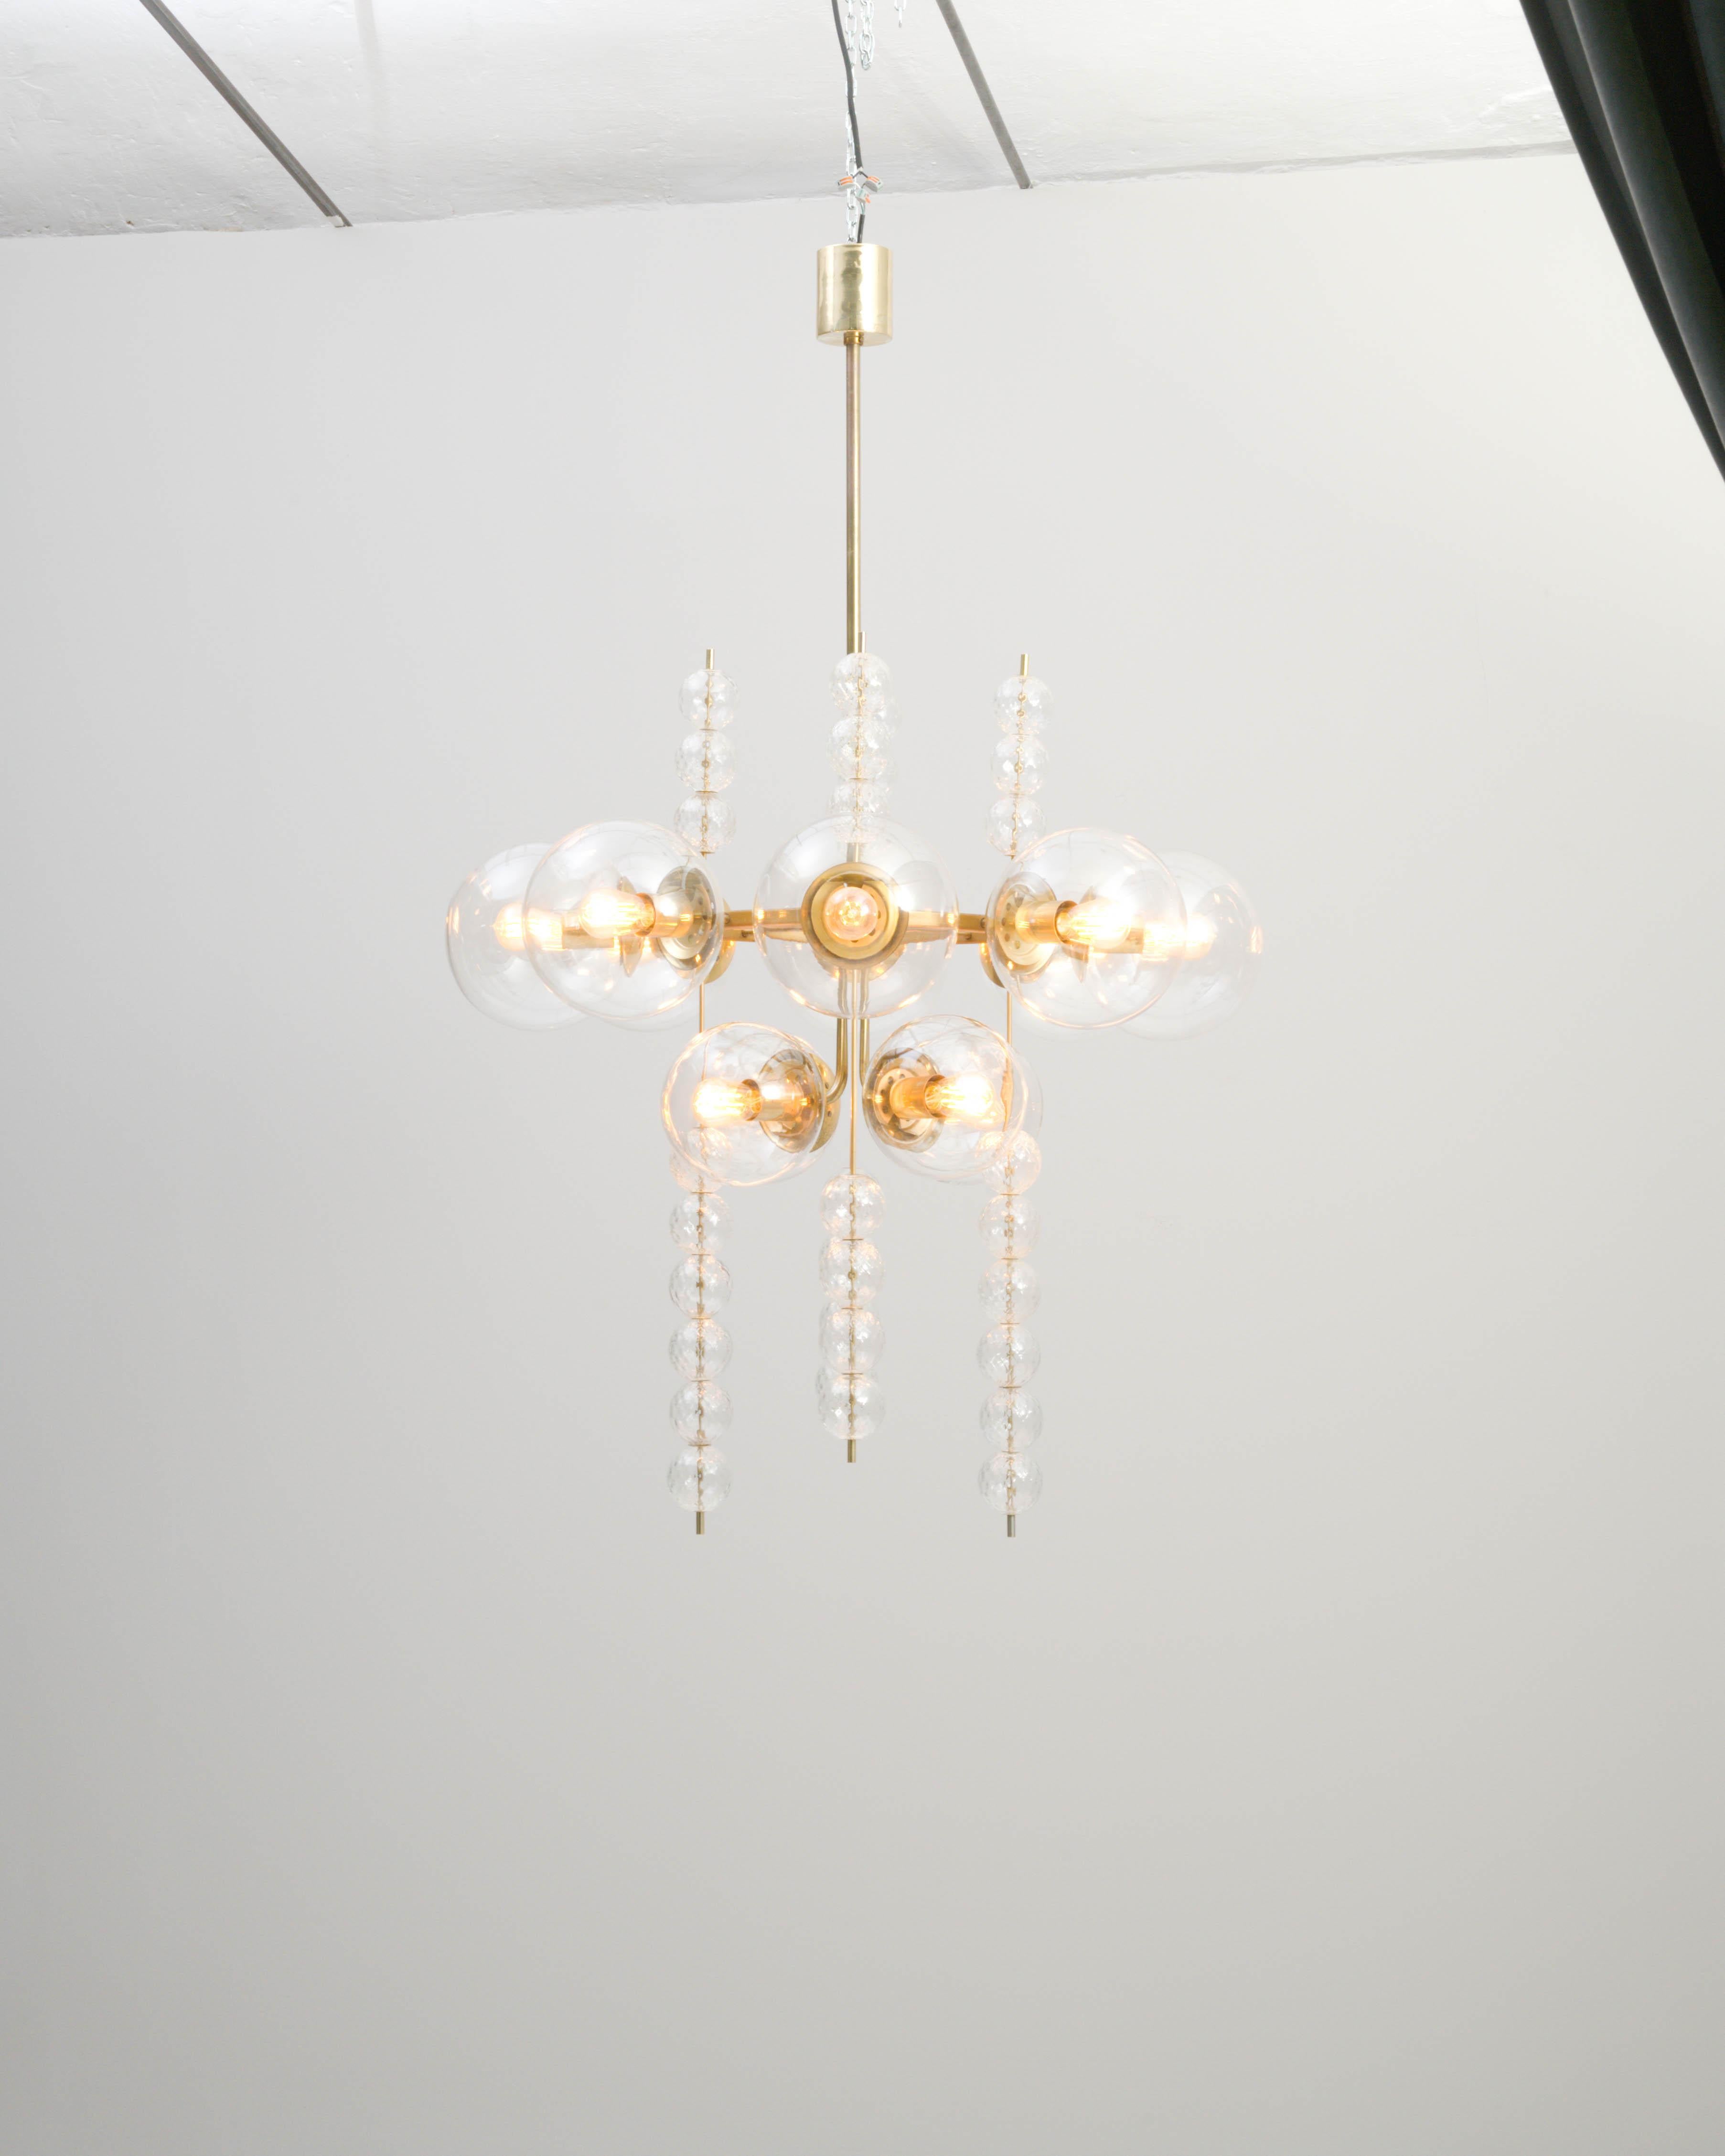 This vintage chandelier conjures an air of timeless glamour. Made in Czechia in the 1970s, glass globes create an impression of ethereal beauty, while the polished brass frame lends a subtle Industrial inflection to the design. Vertical strings of